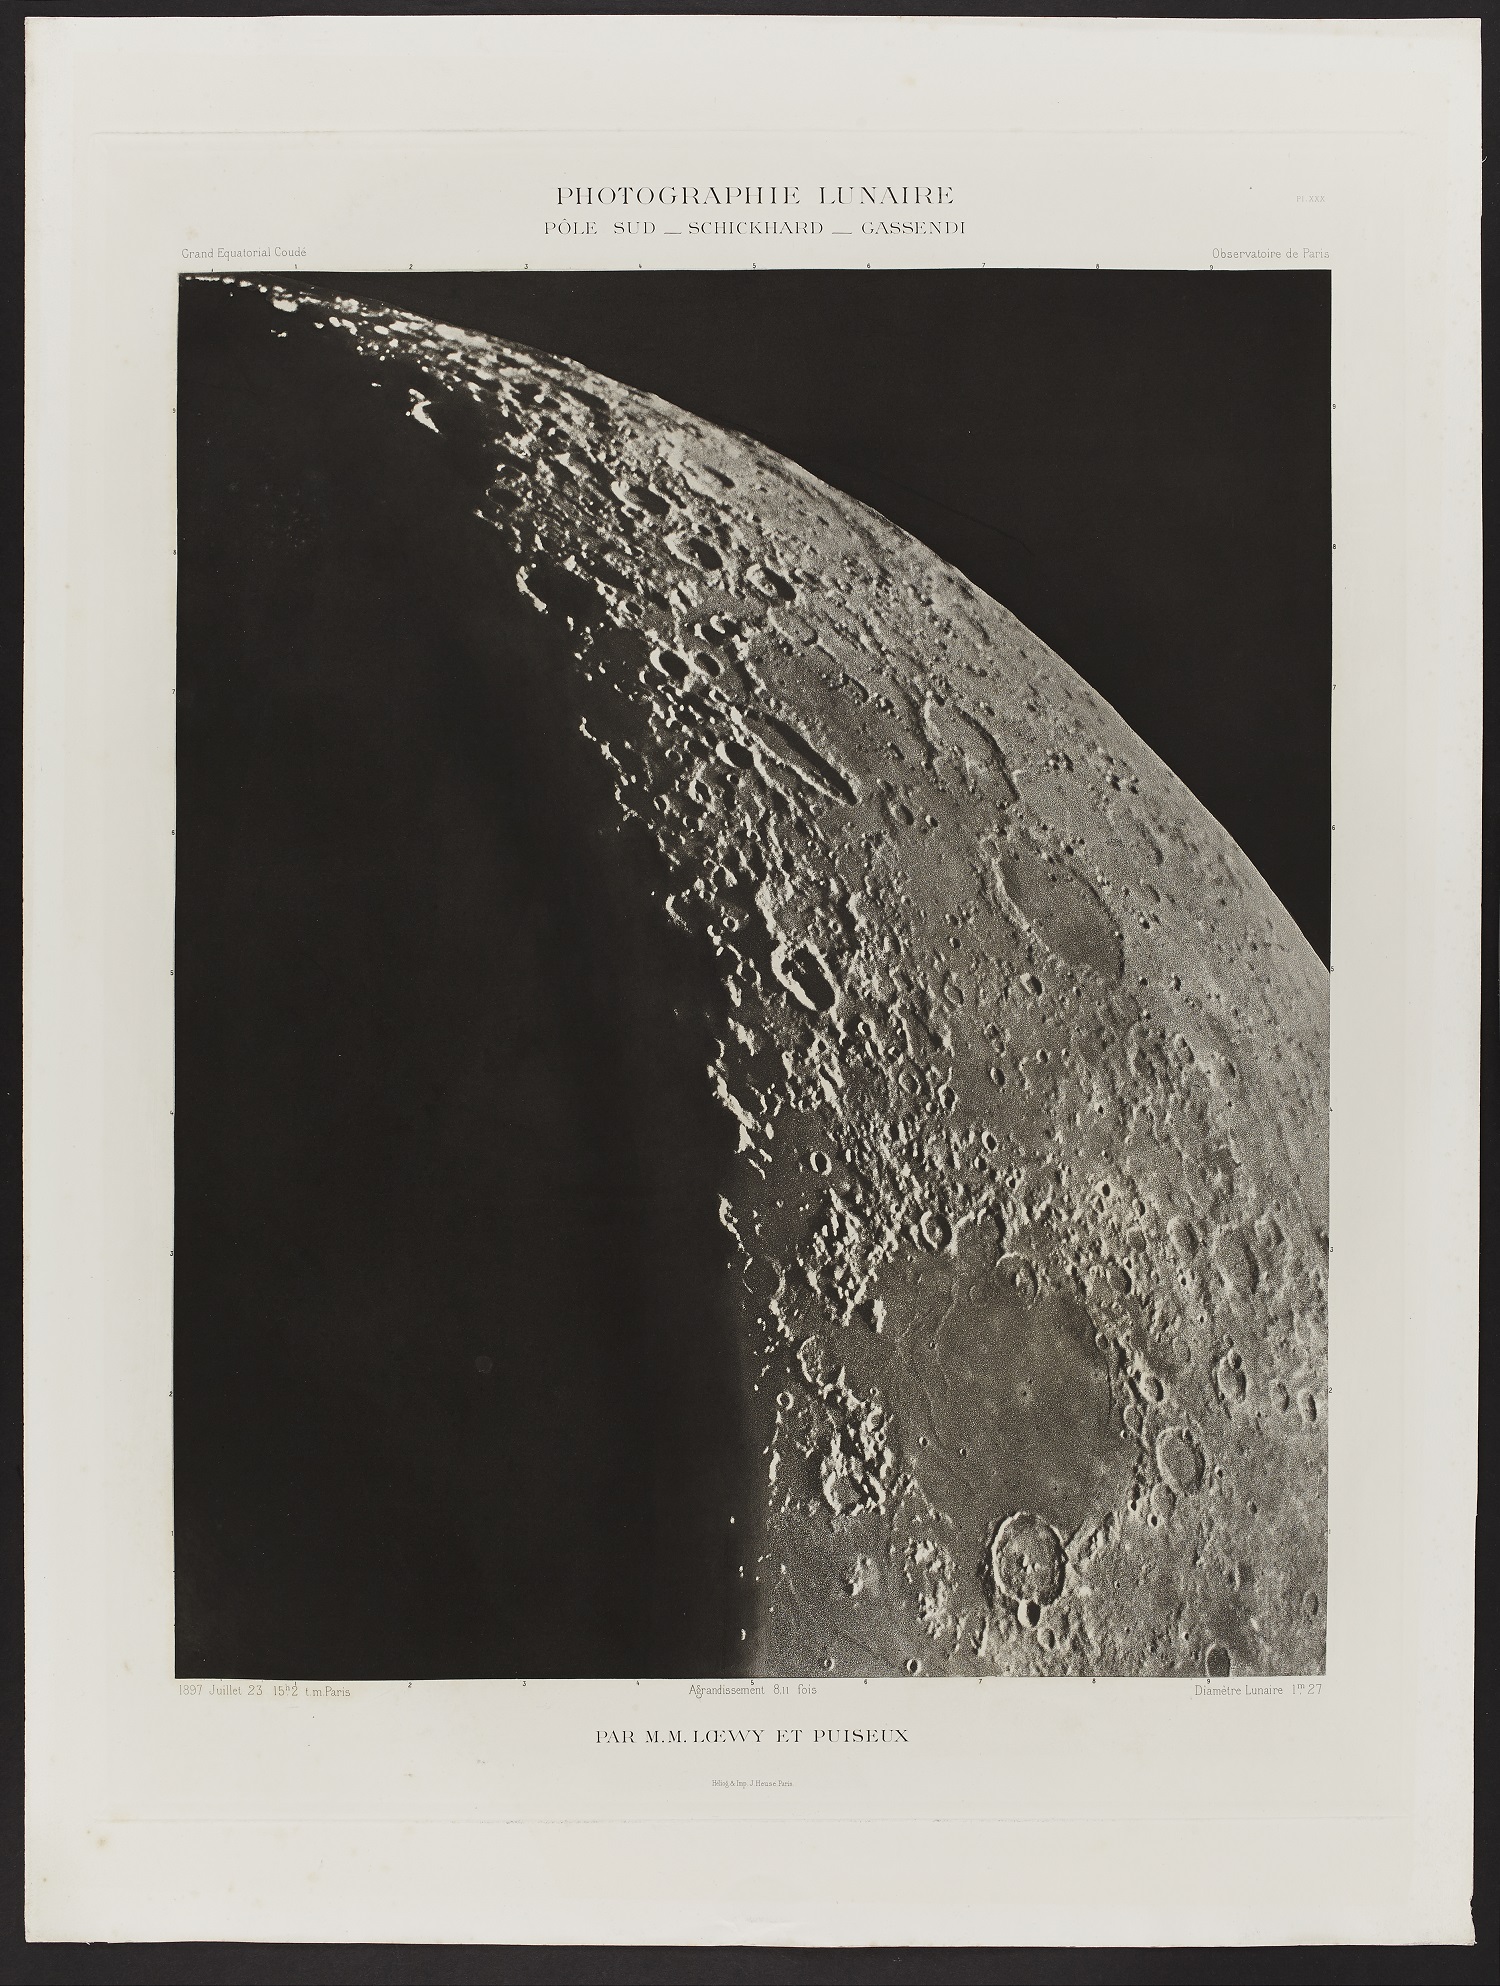 Black and white page from a book titled Atlas of the Moon featuring photographs of the moon.